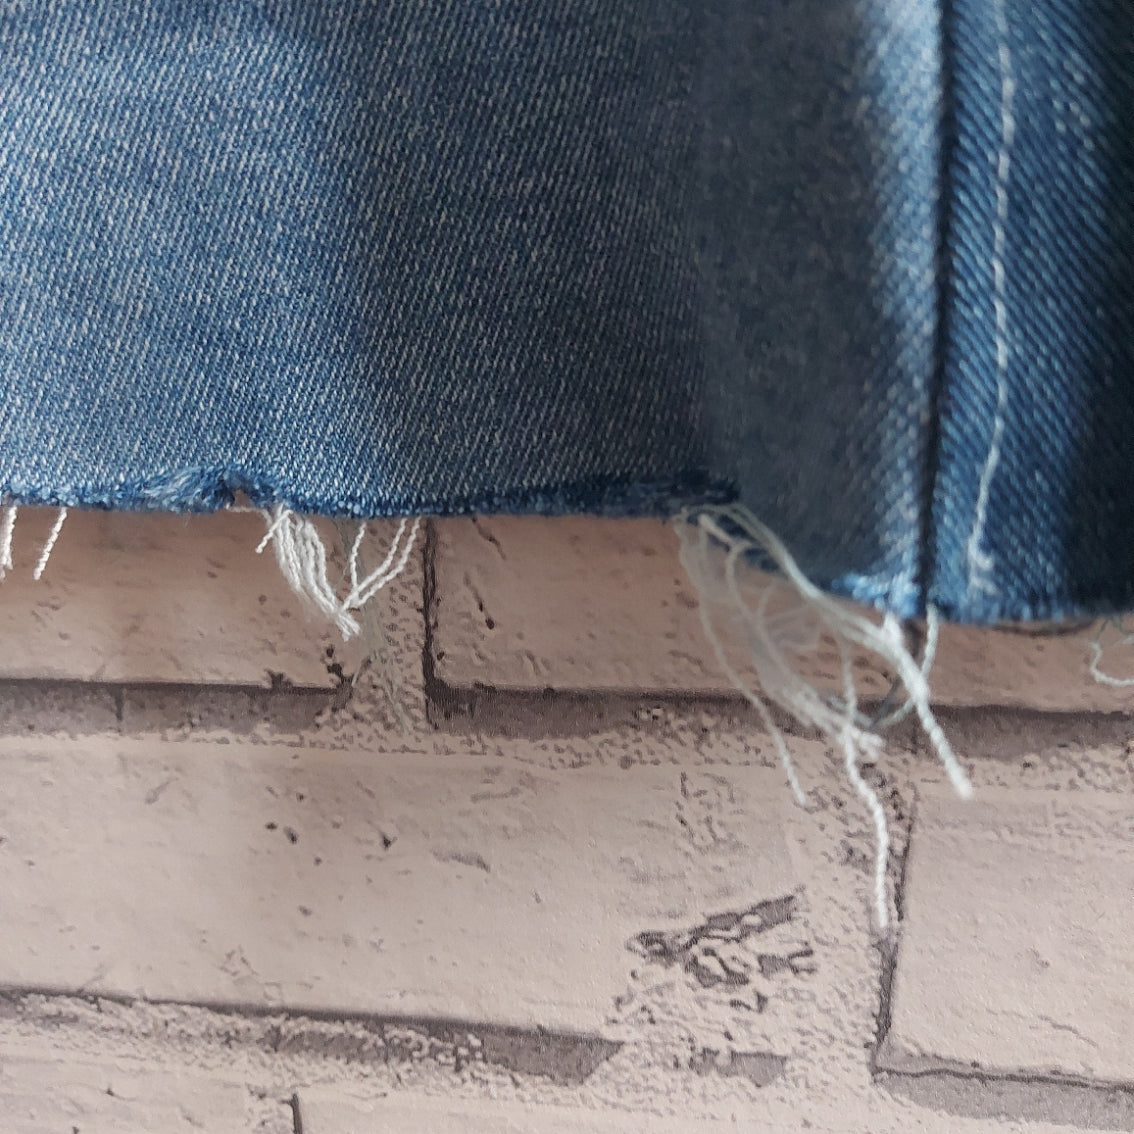 Upcycled Denim  Lace-up Legs